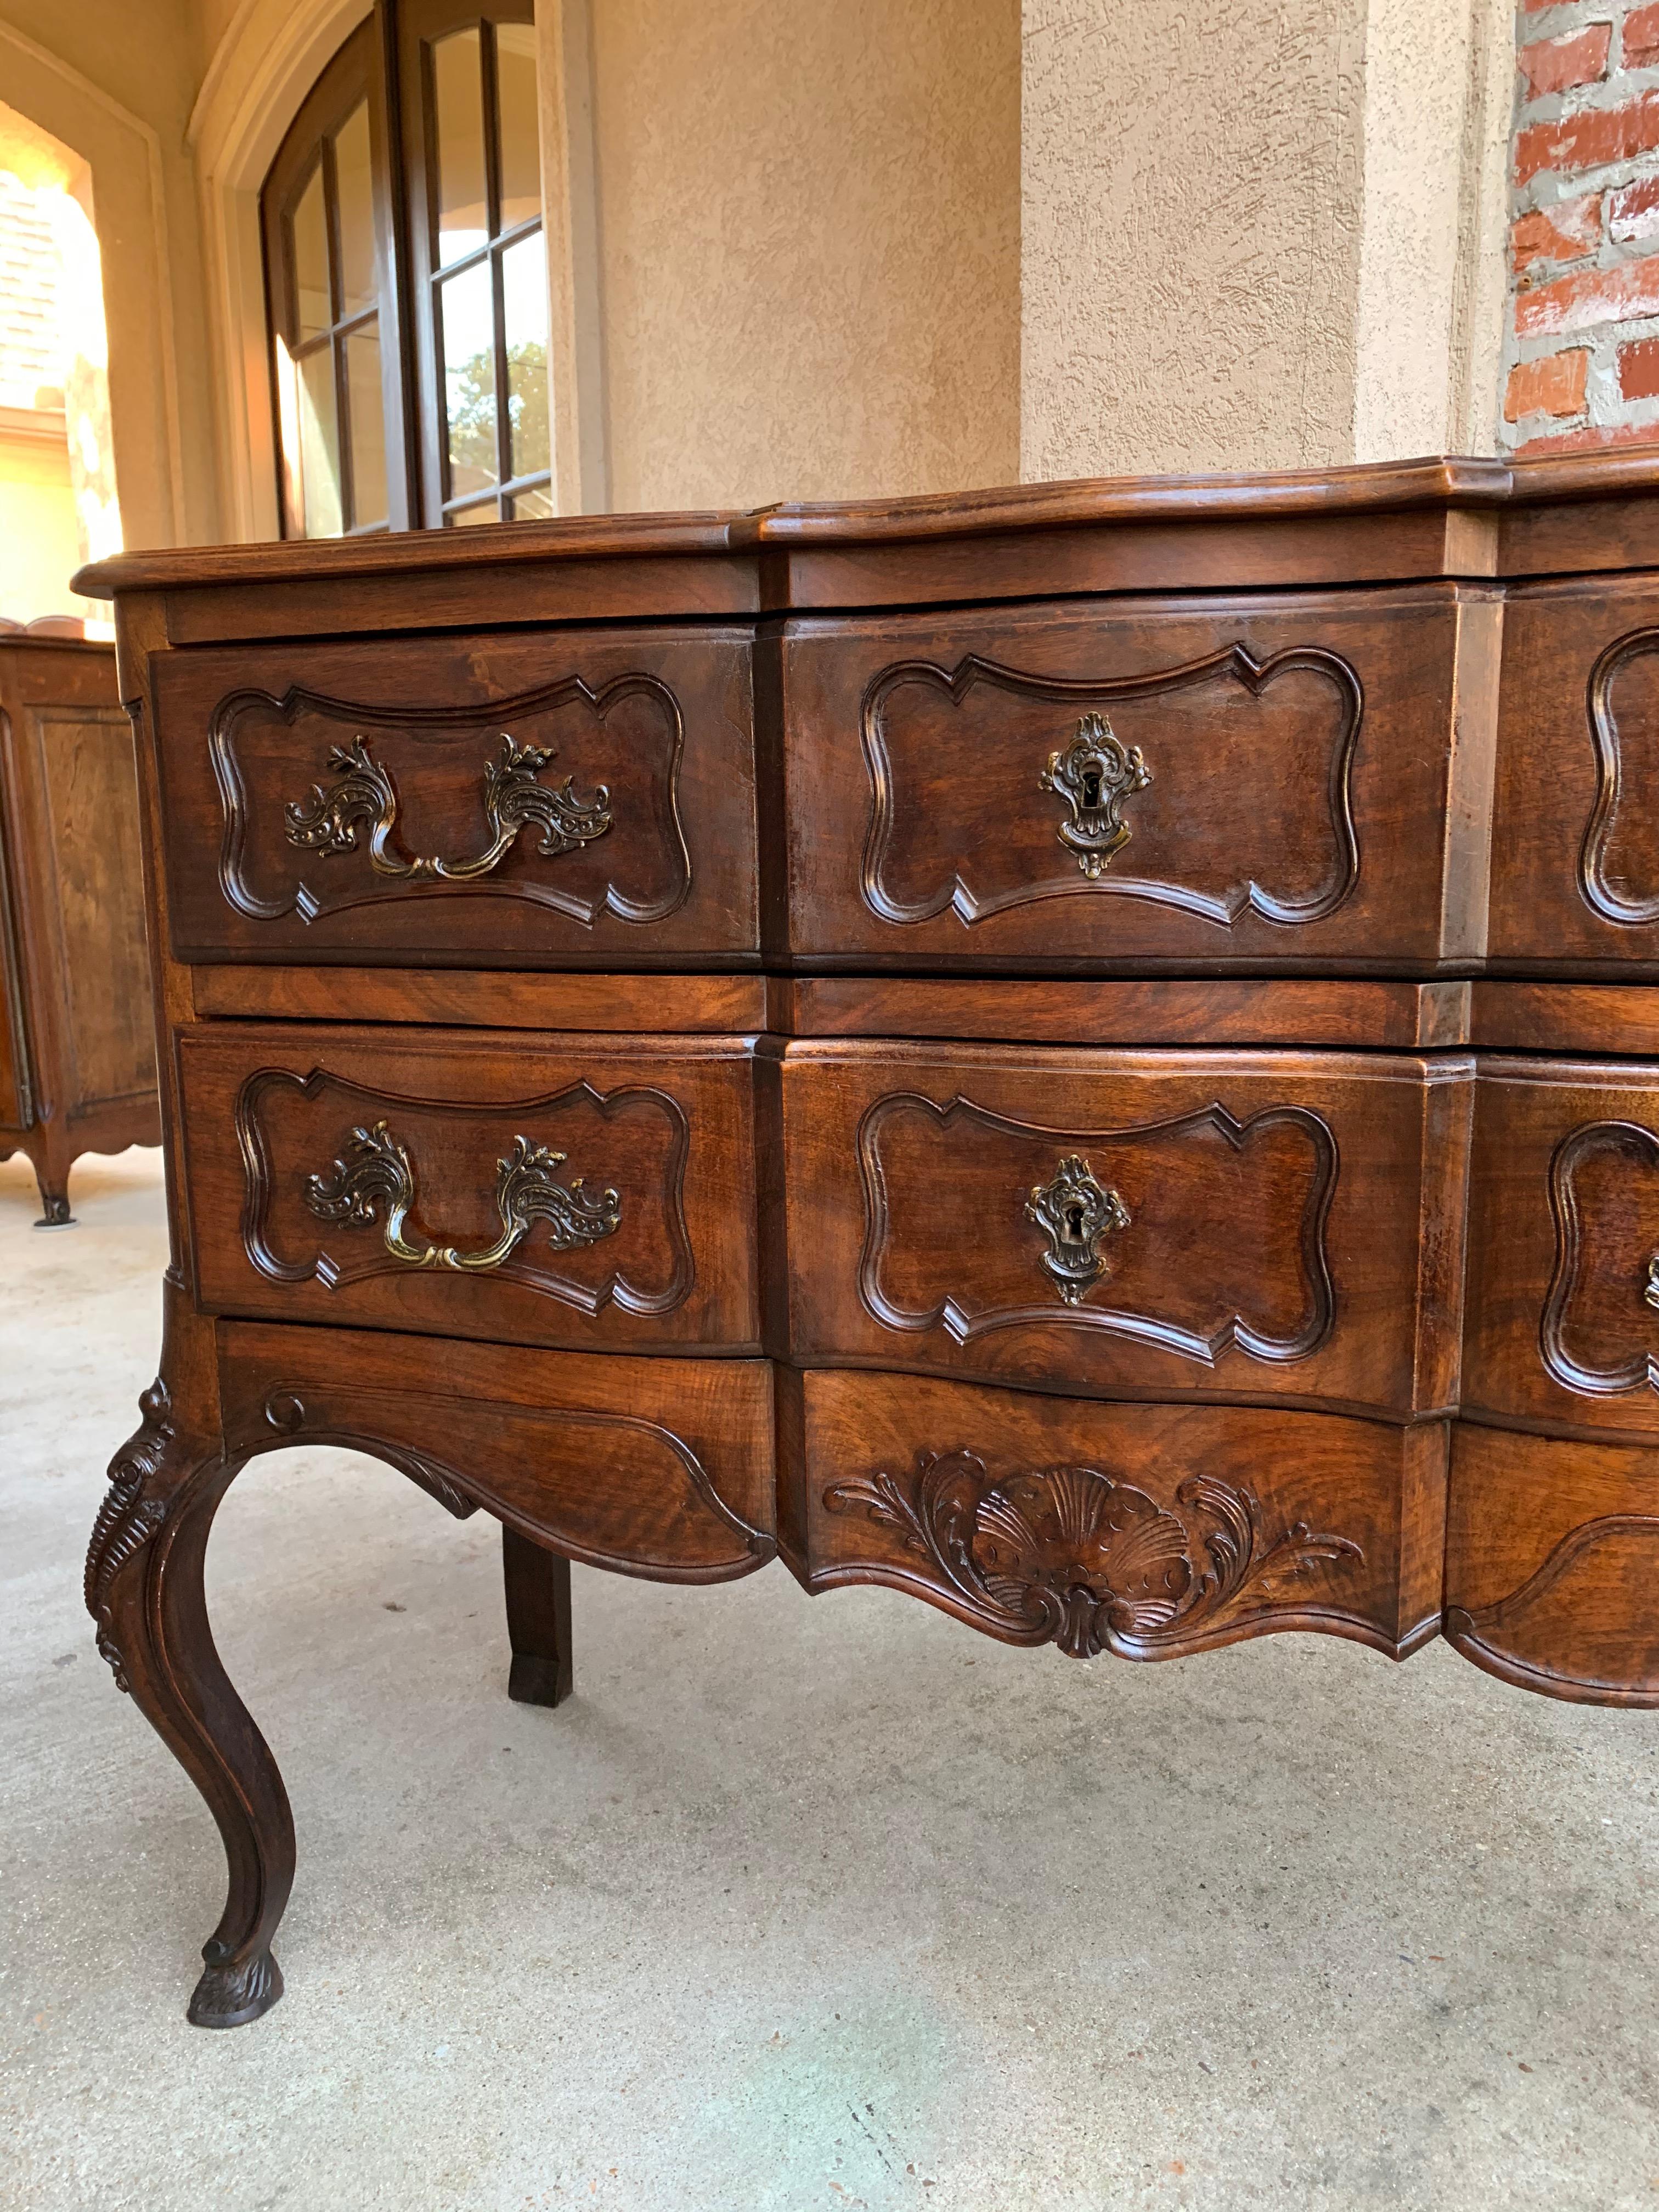 Hand-Carved Antique French Carved Walnut Commode Chest of Drawers Sideboard Louis XV Style